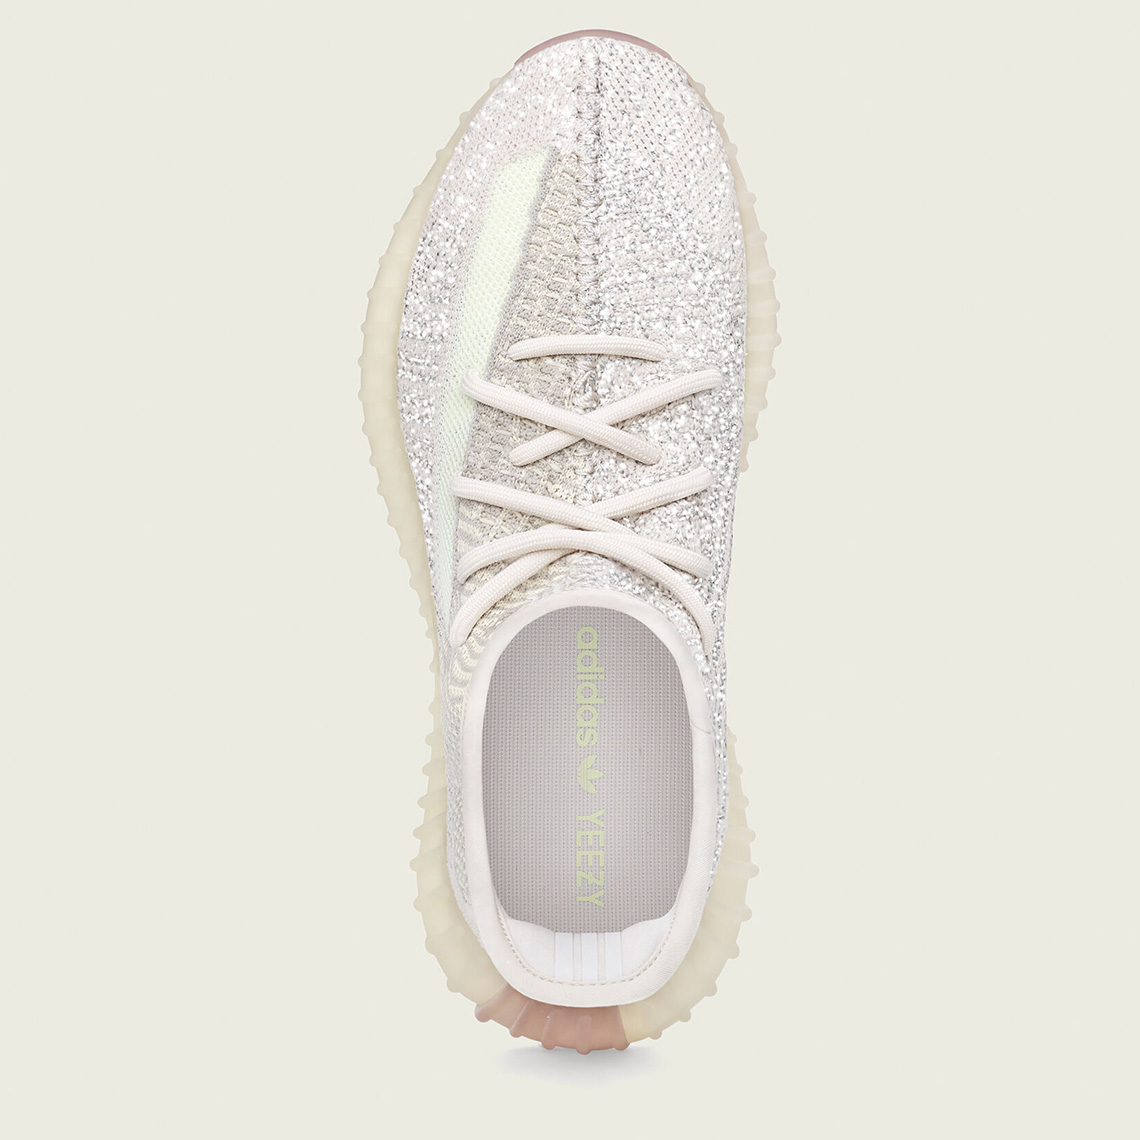 adidas - YEEZY BOOST 350 V2 GLOW. AVAILABLE 25 MAY